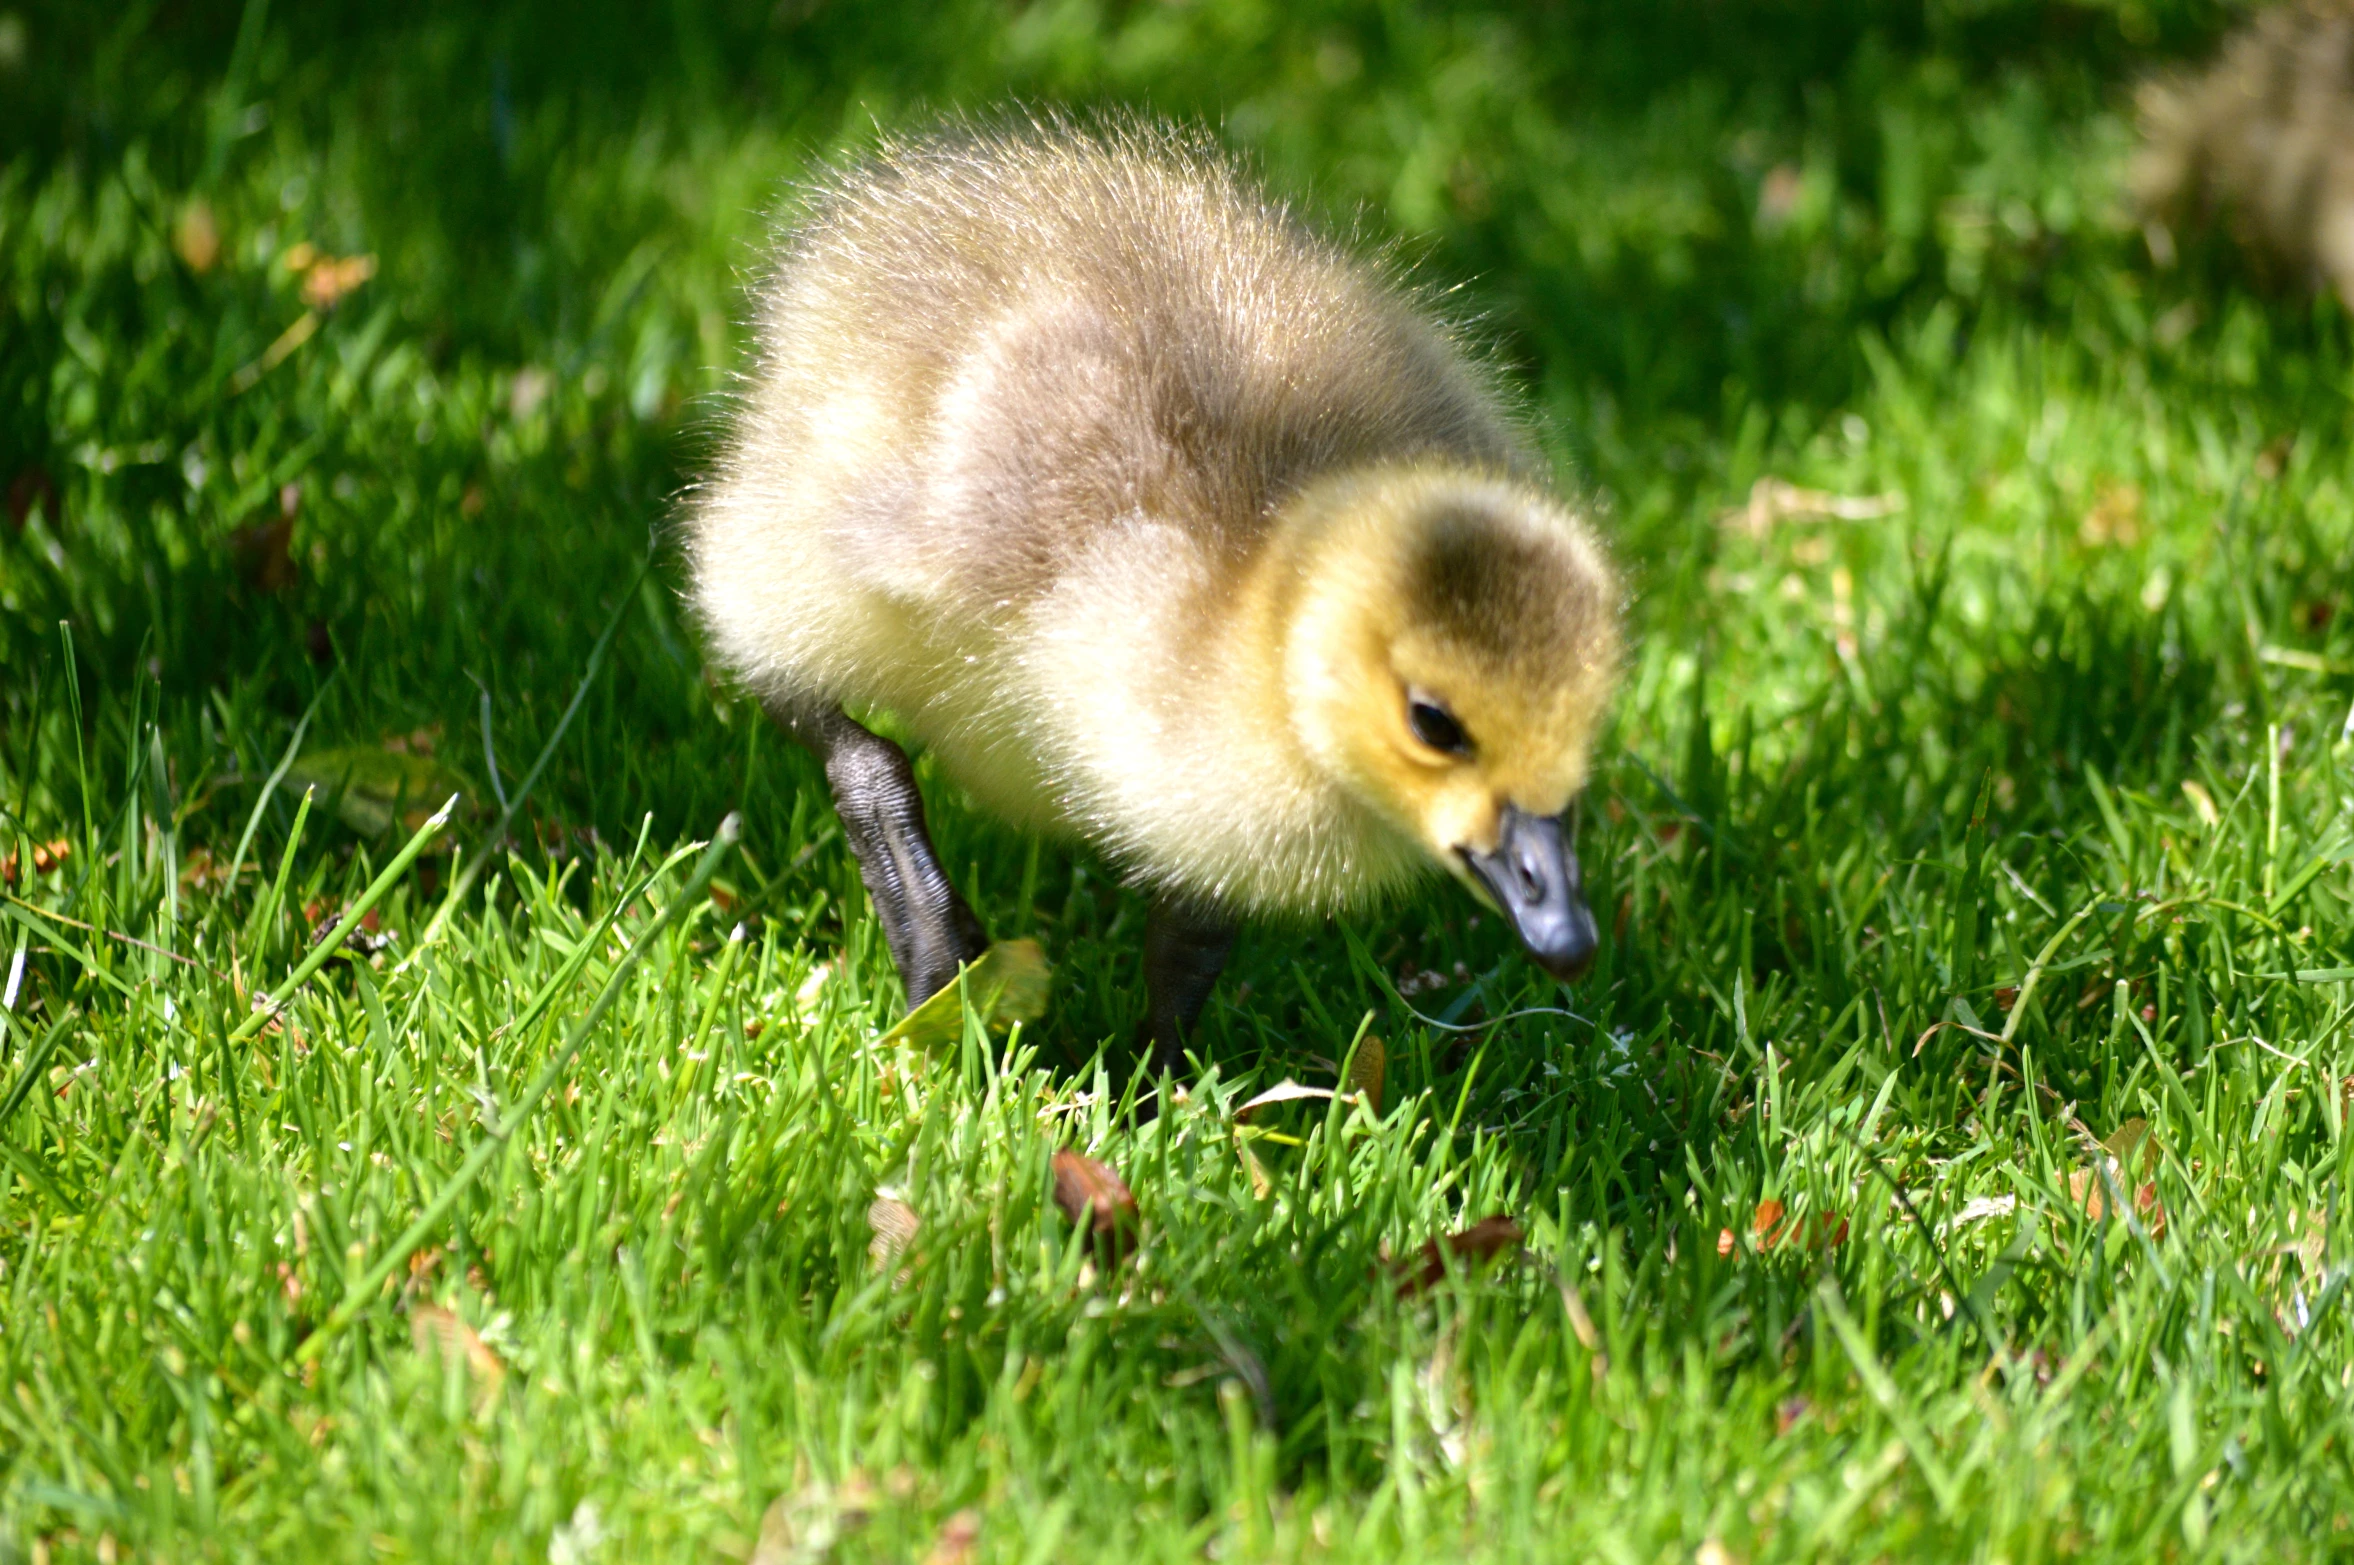 a duckling walking through grass on a sunny day